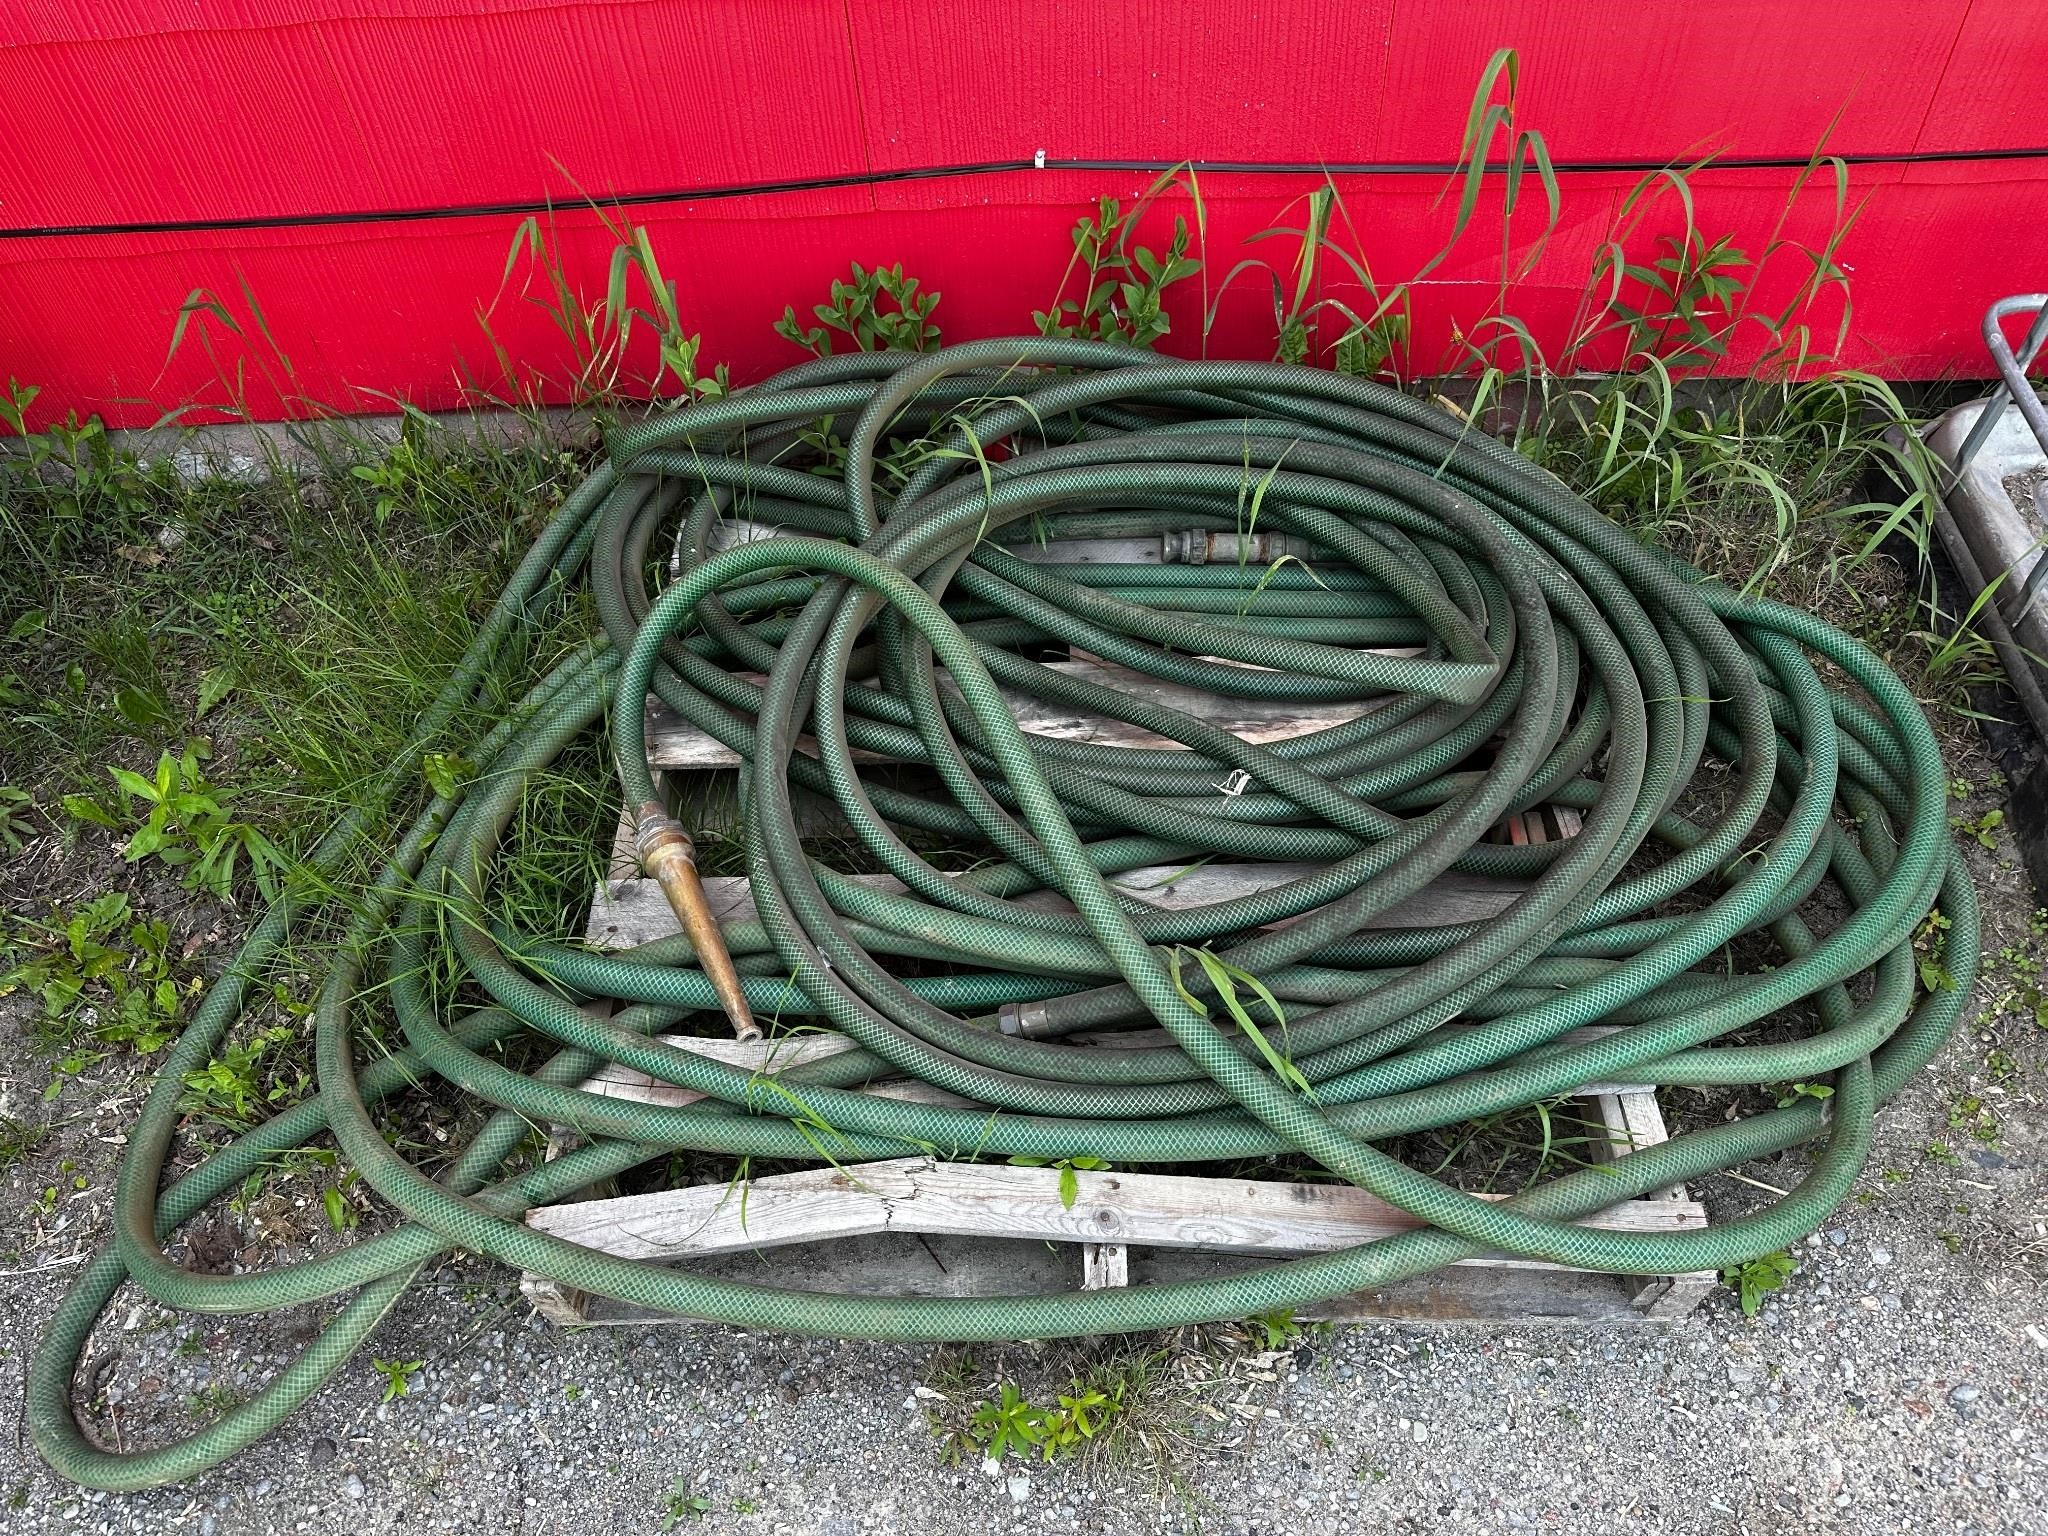 Long Length of Water Hose w/Nozzle